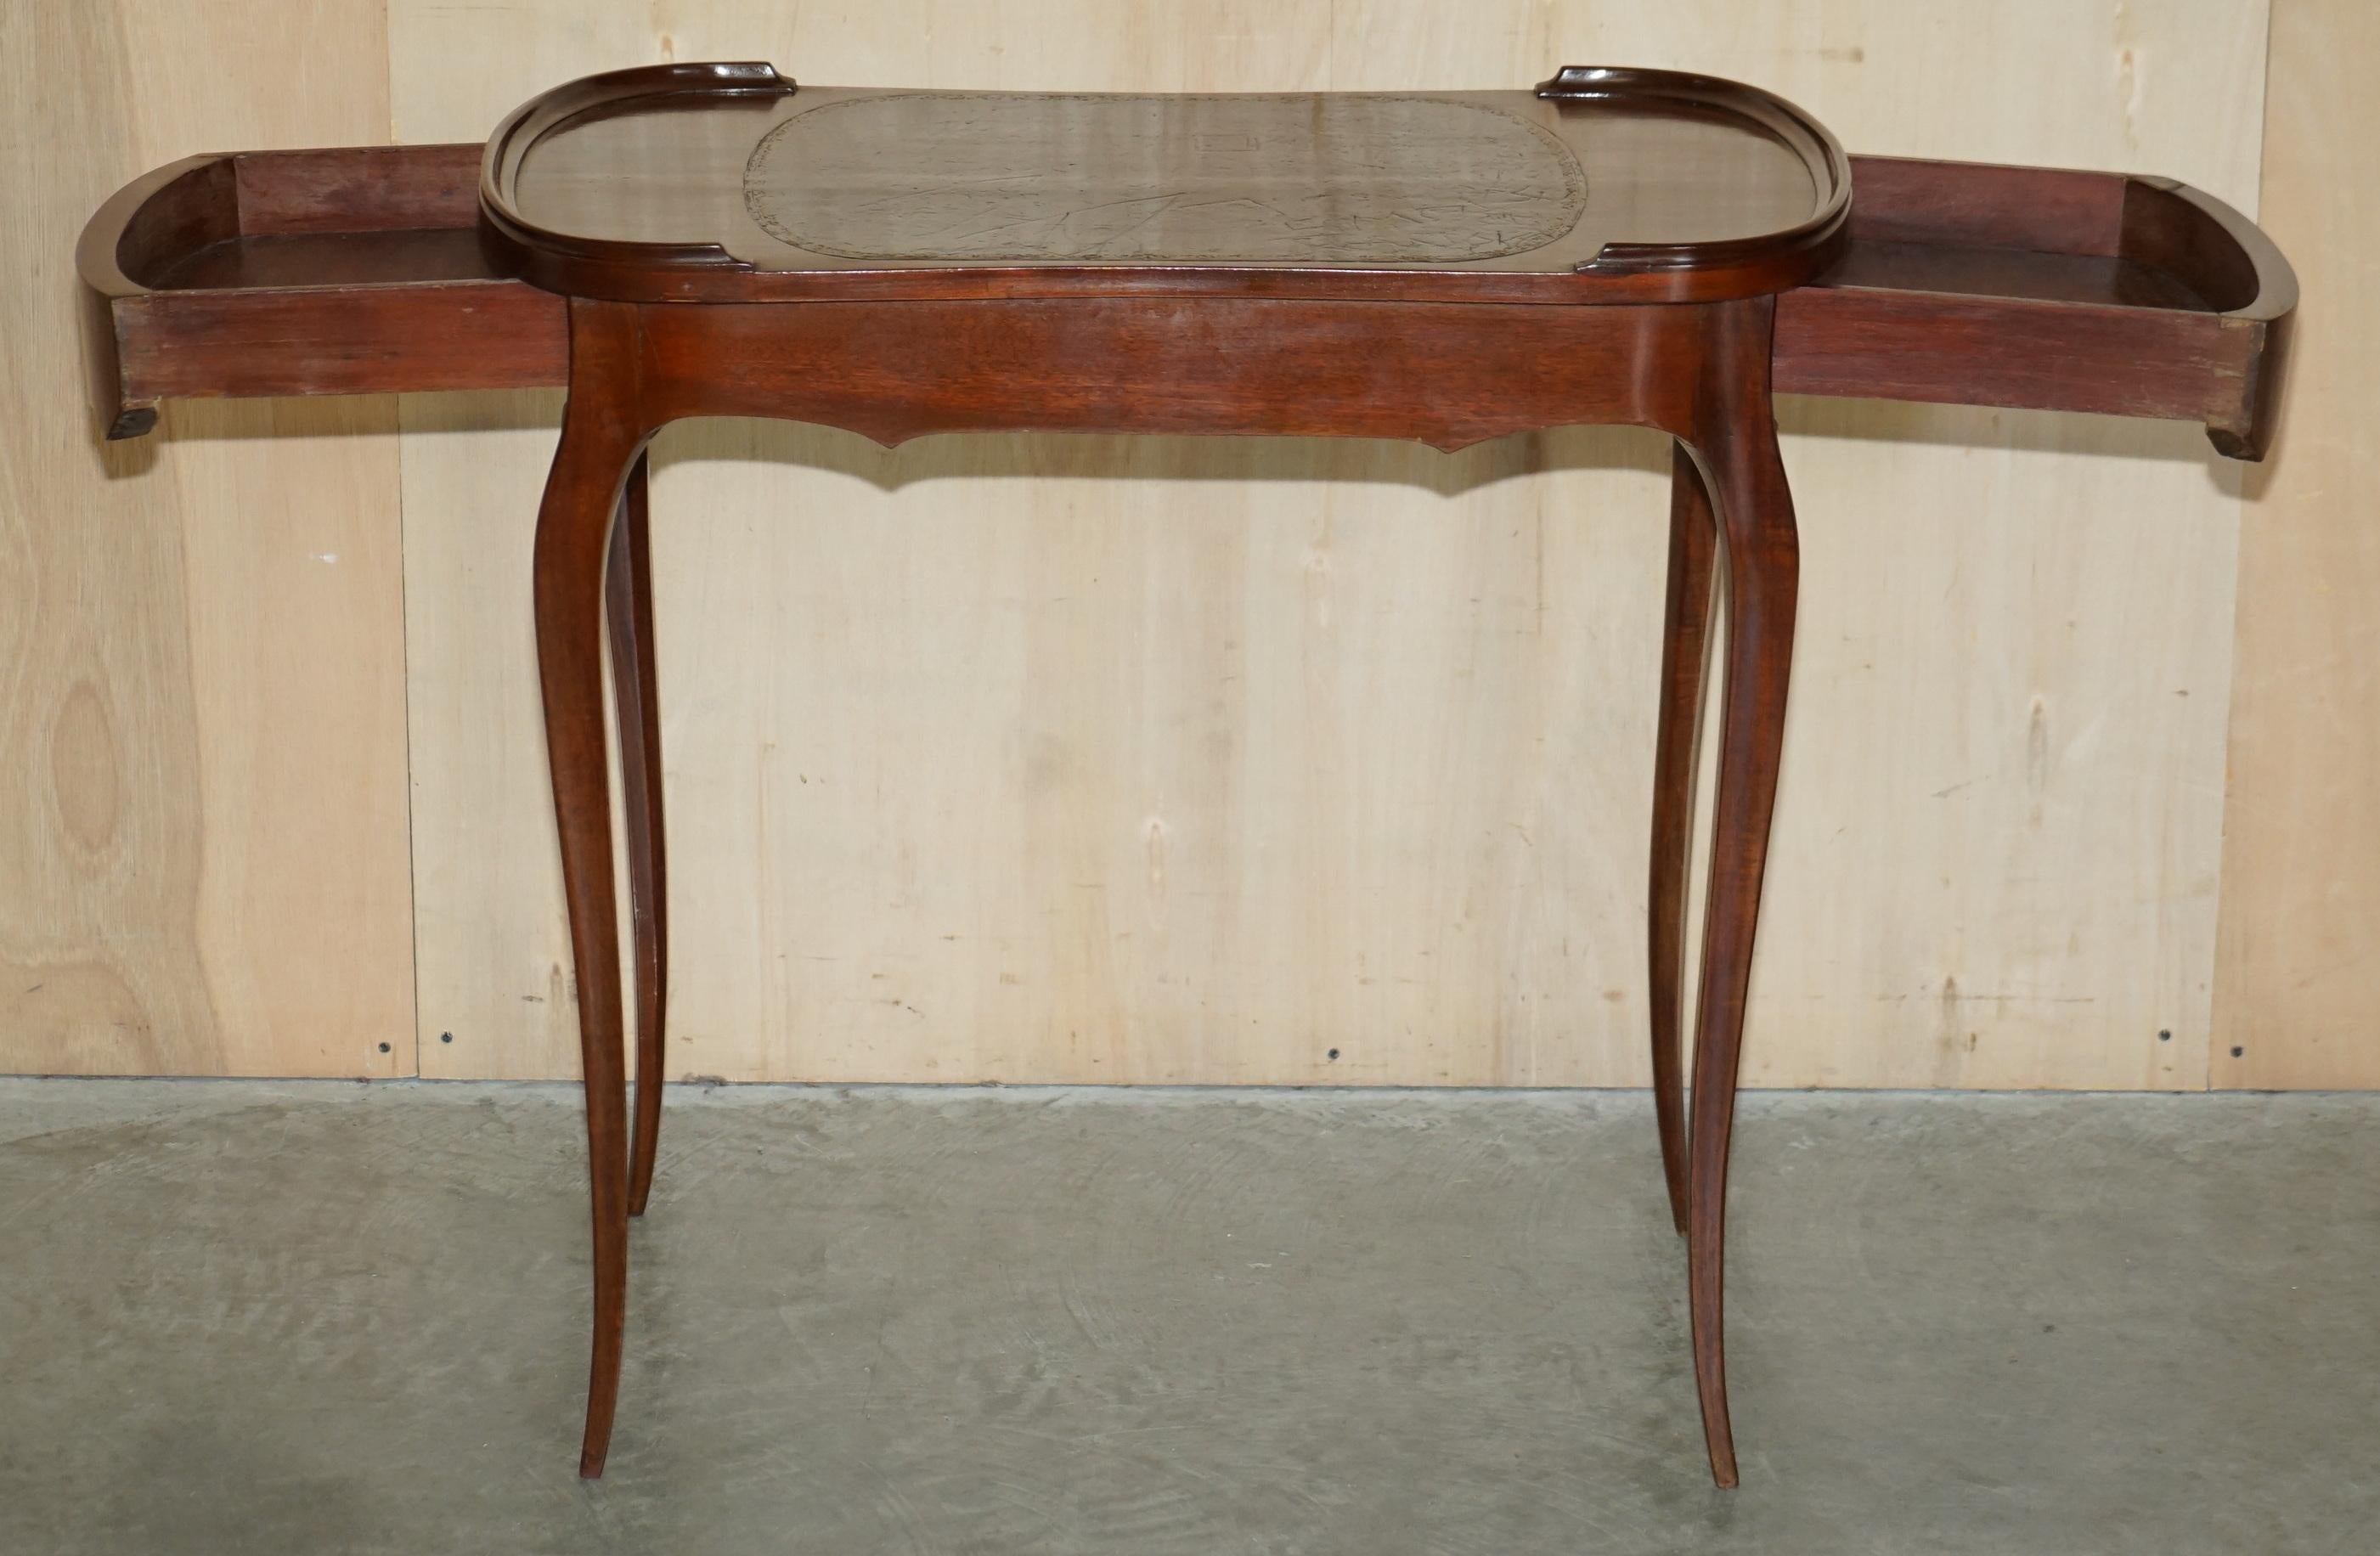 Restored Antique Kidney Shaped Occasional Table with Drawers Brown Leather Top For Sale 12